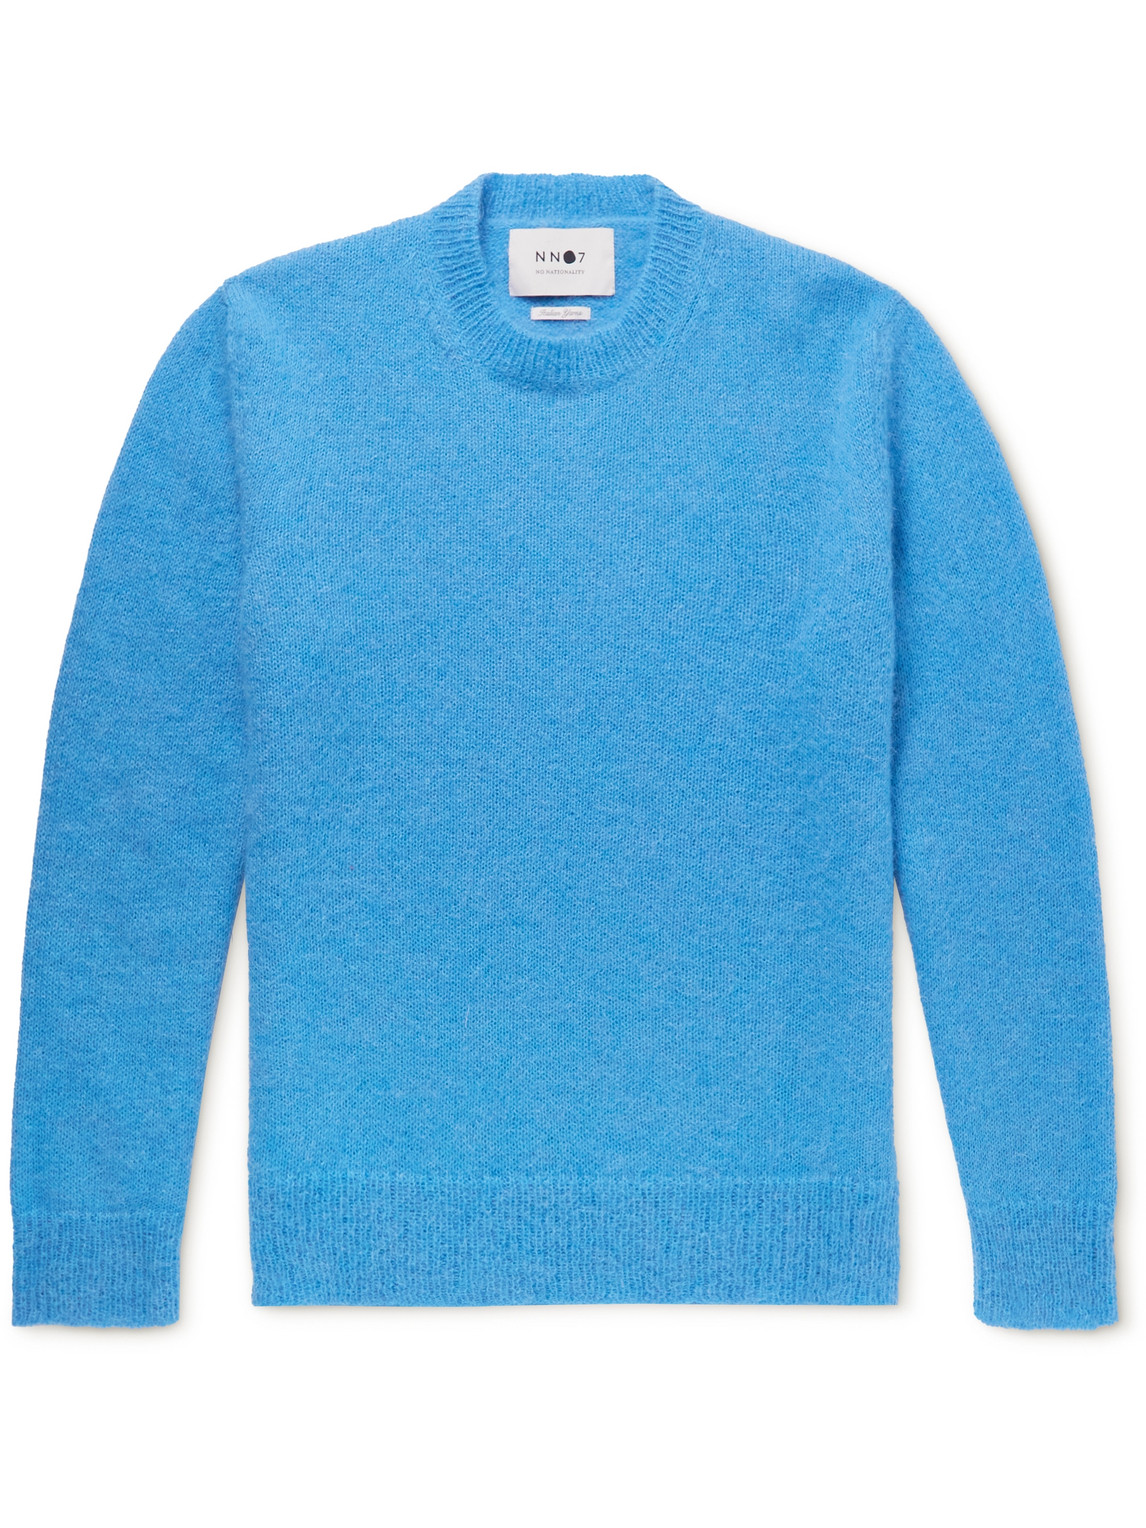 NN07 Walther Brushed Knitted Sweater